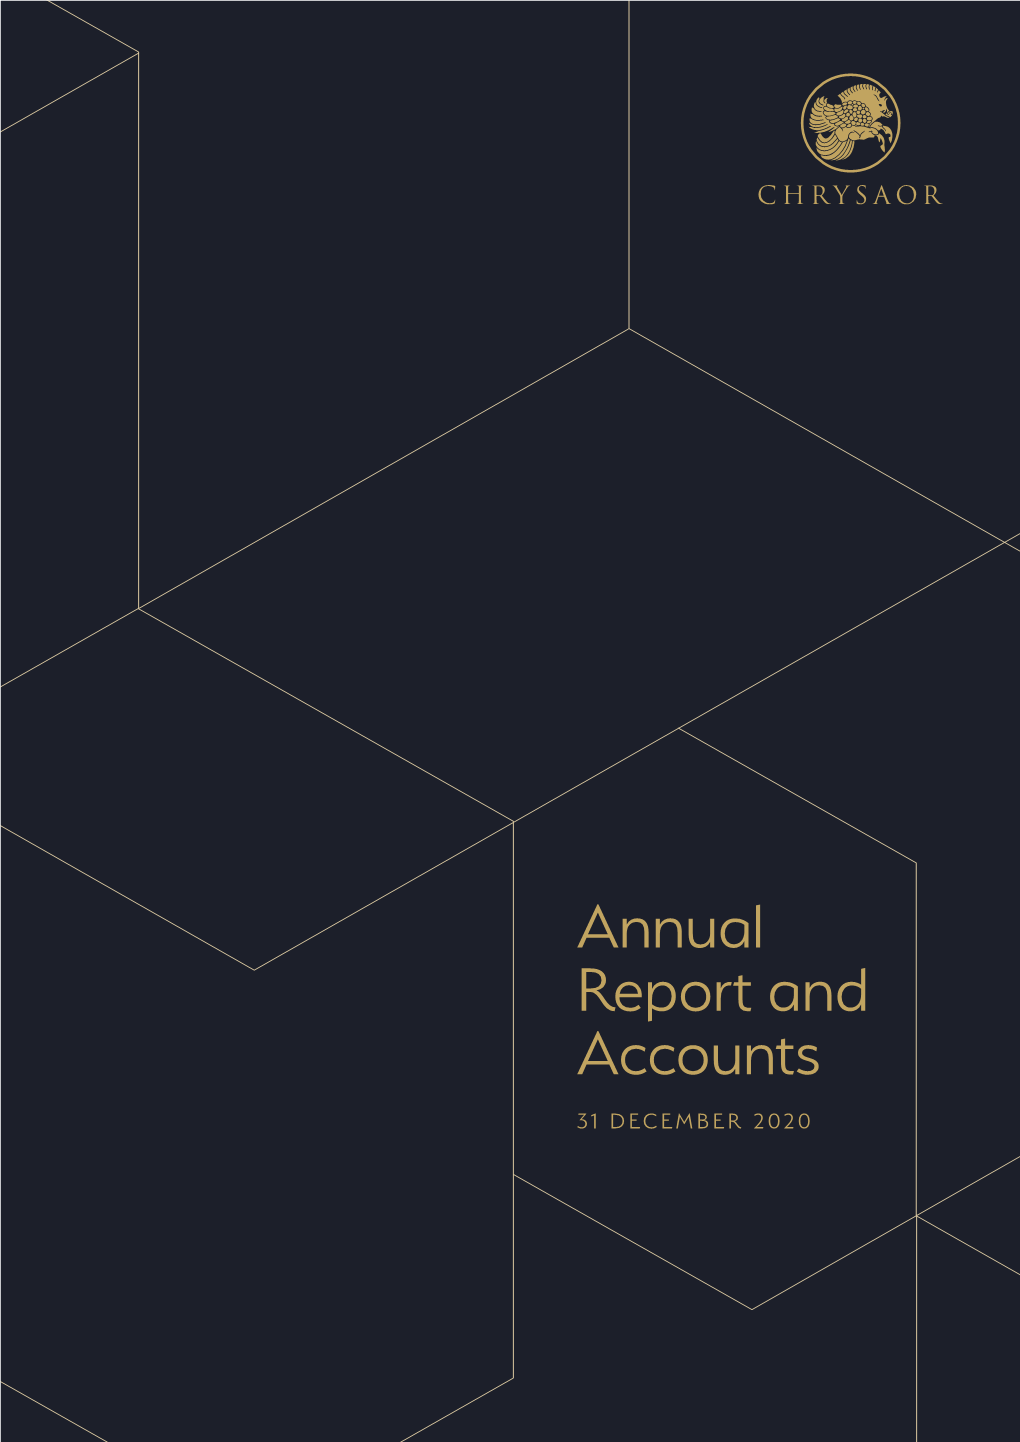 Annual Report and Accounts 31 DECEMBER 2020 Contents